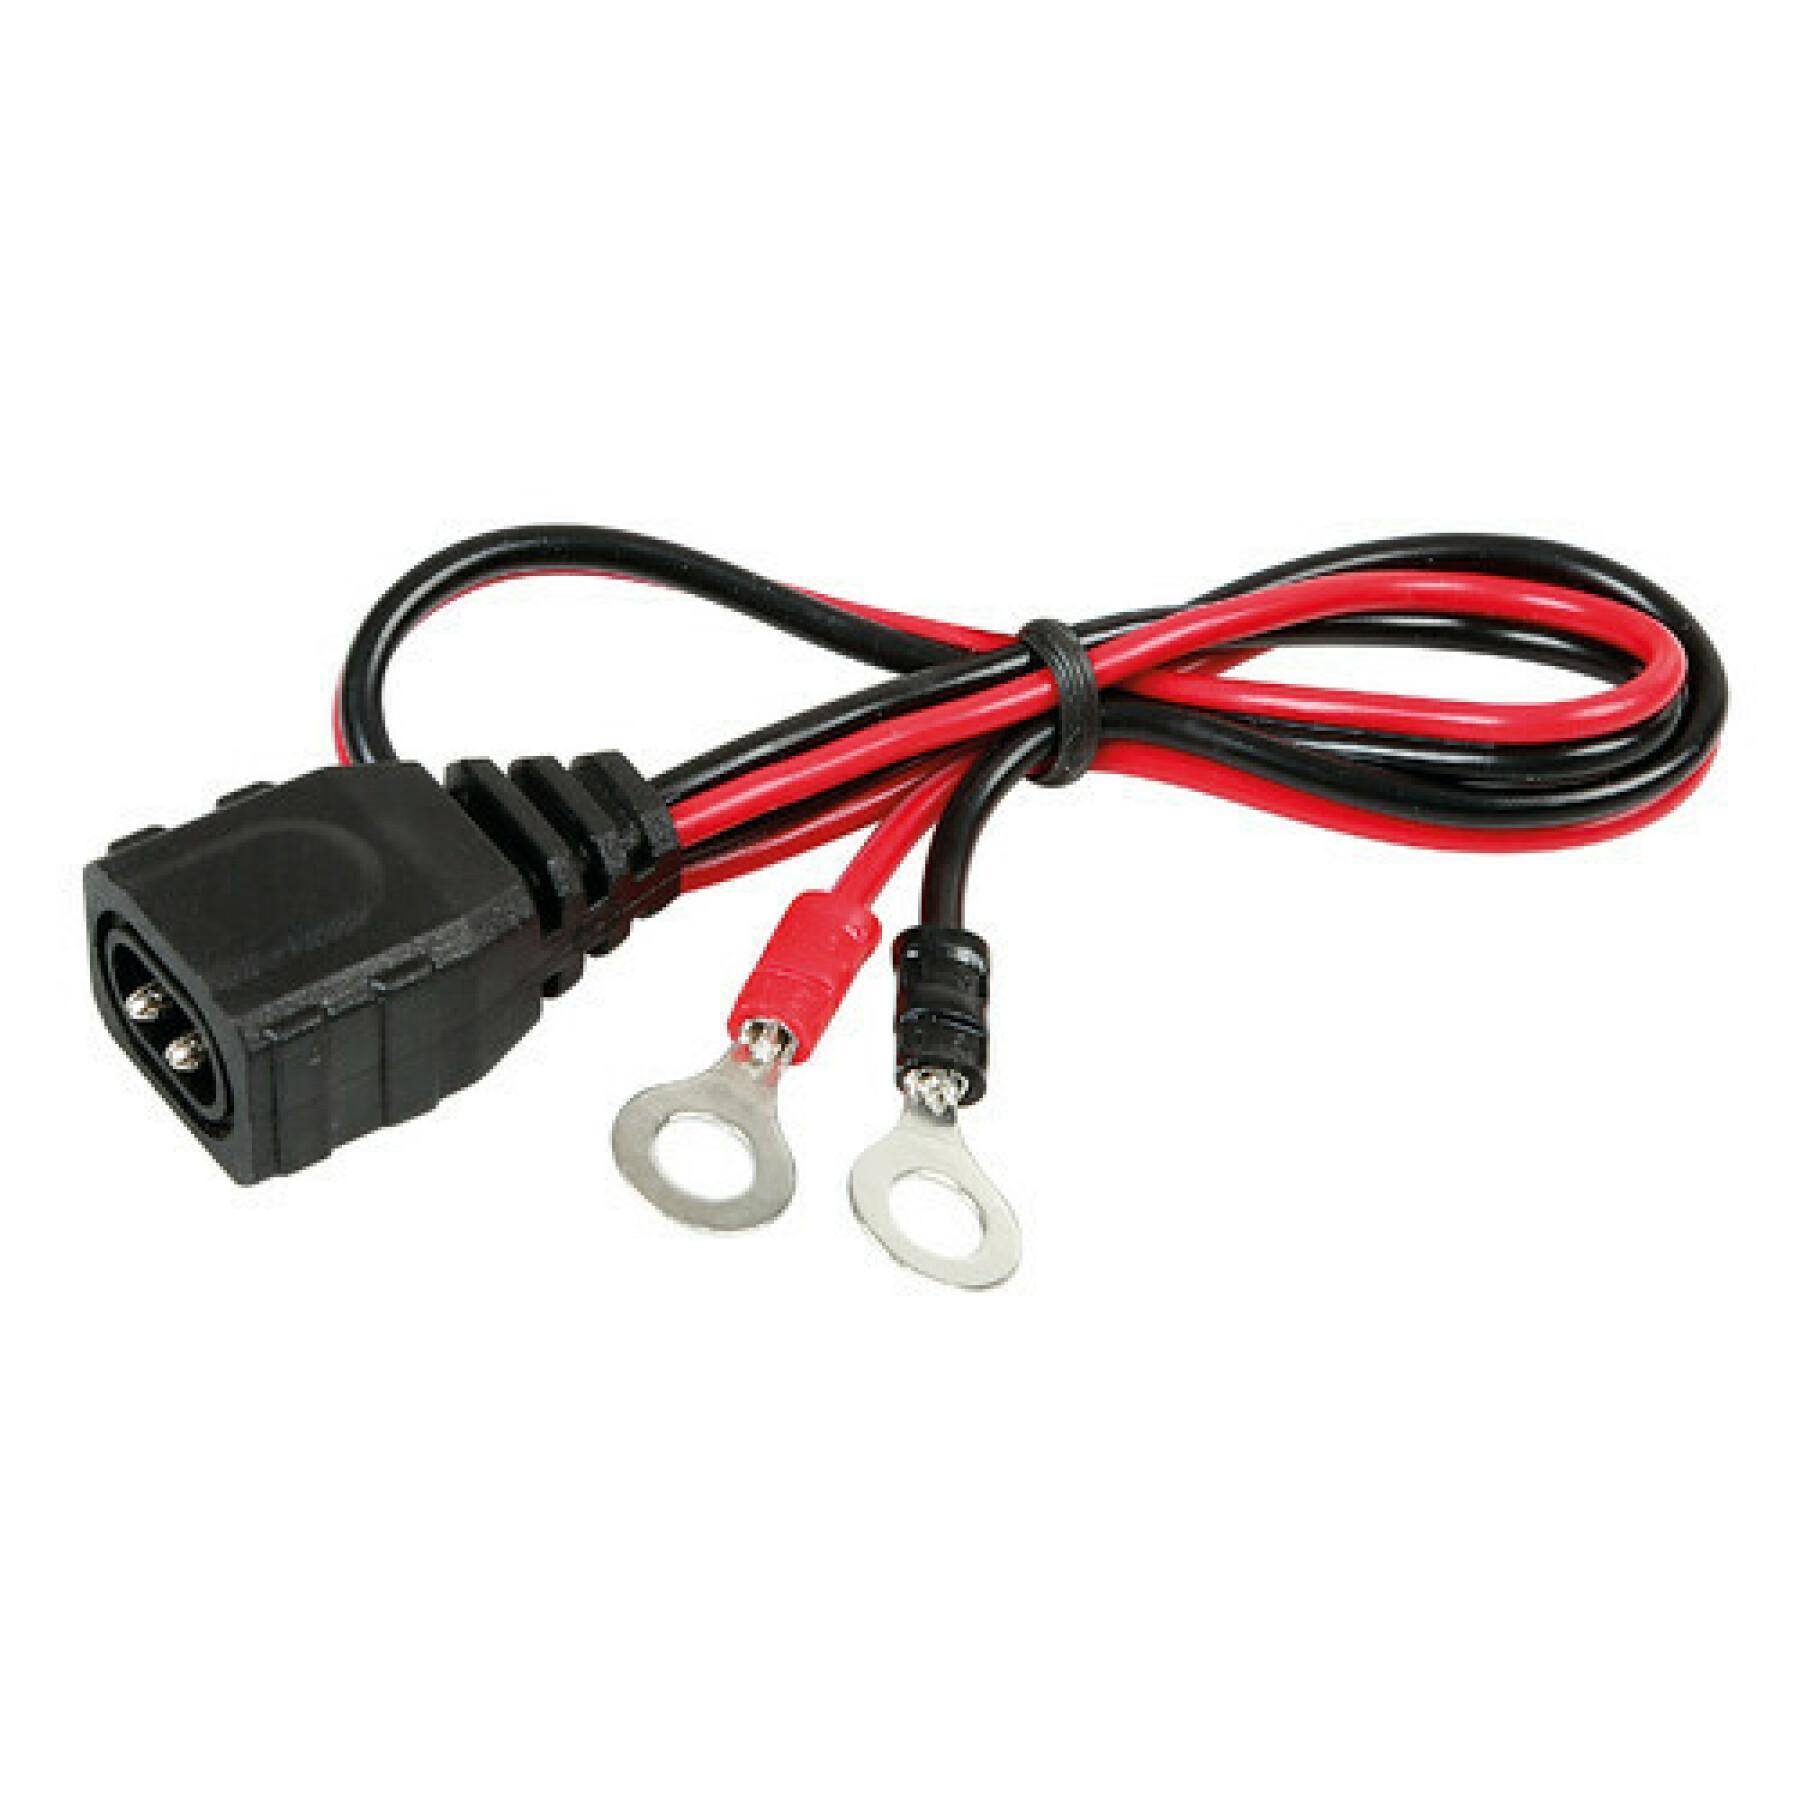 Kit of quick battery connection cables for amperomatic Lampa